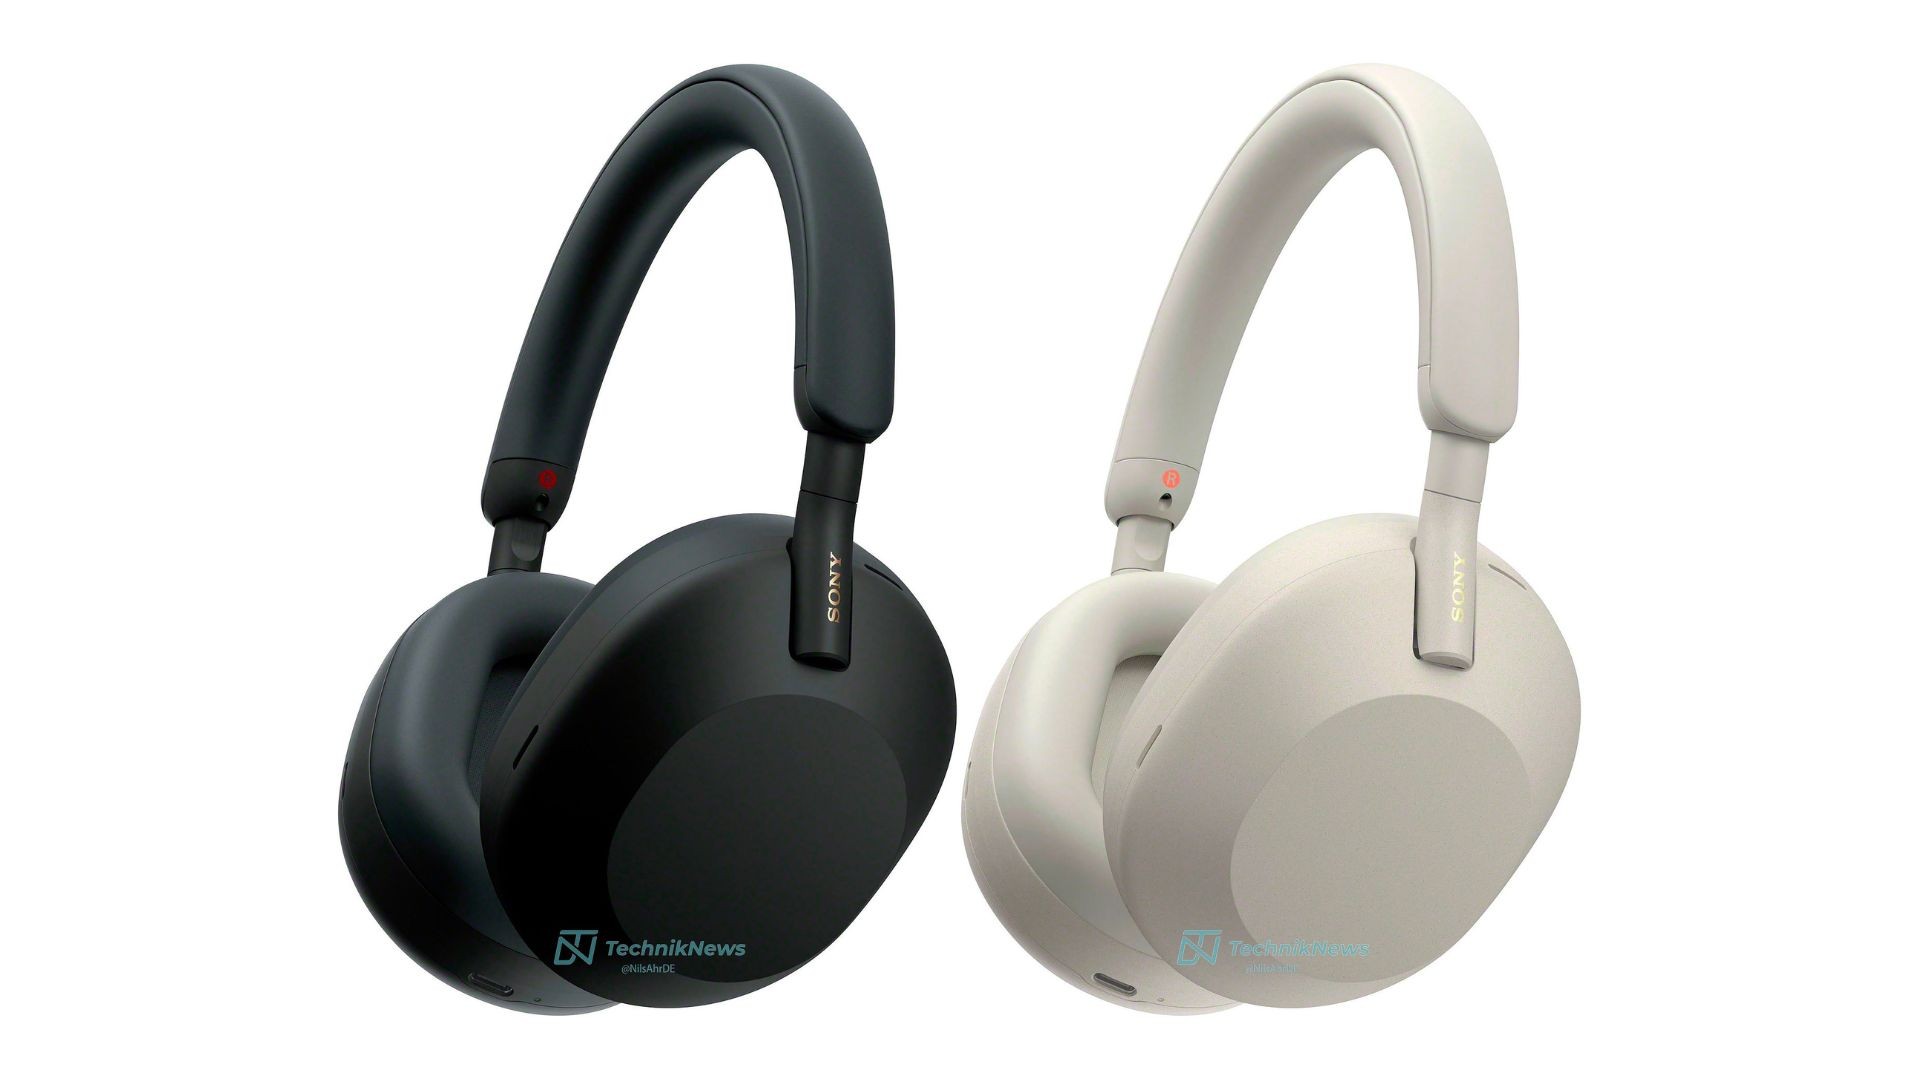 Sony WH-1000XM5 wireless headphones in black and silver